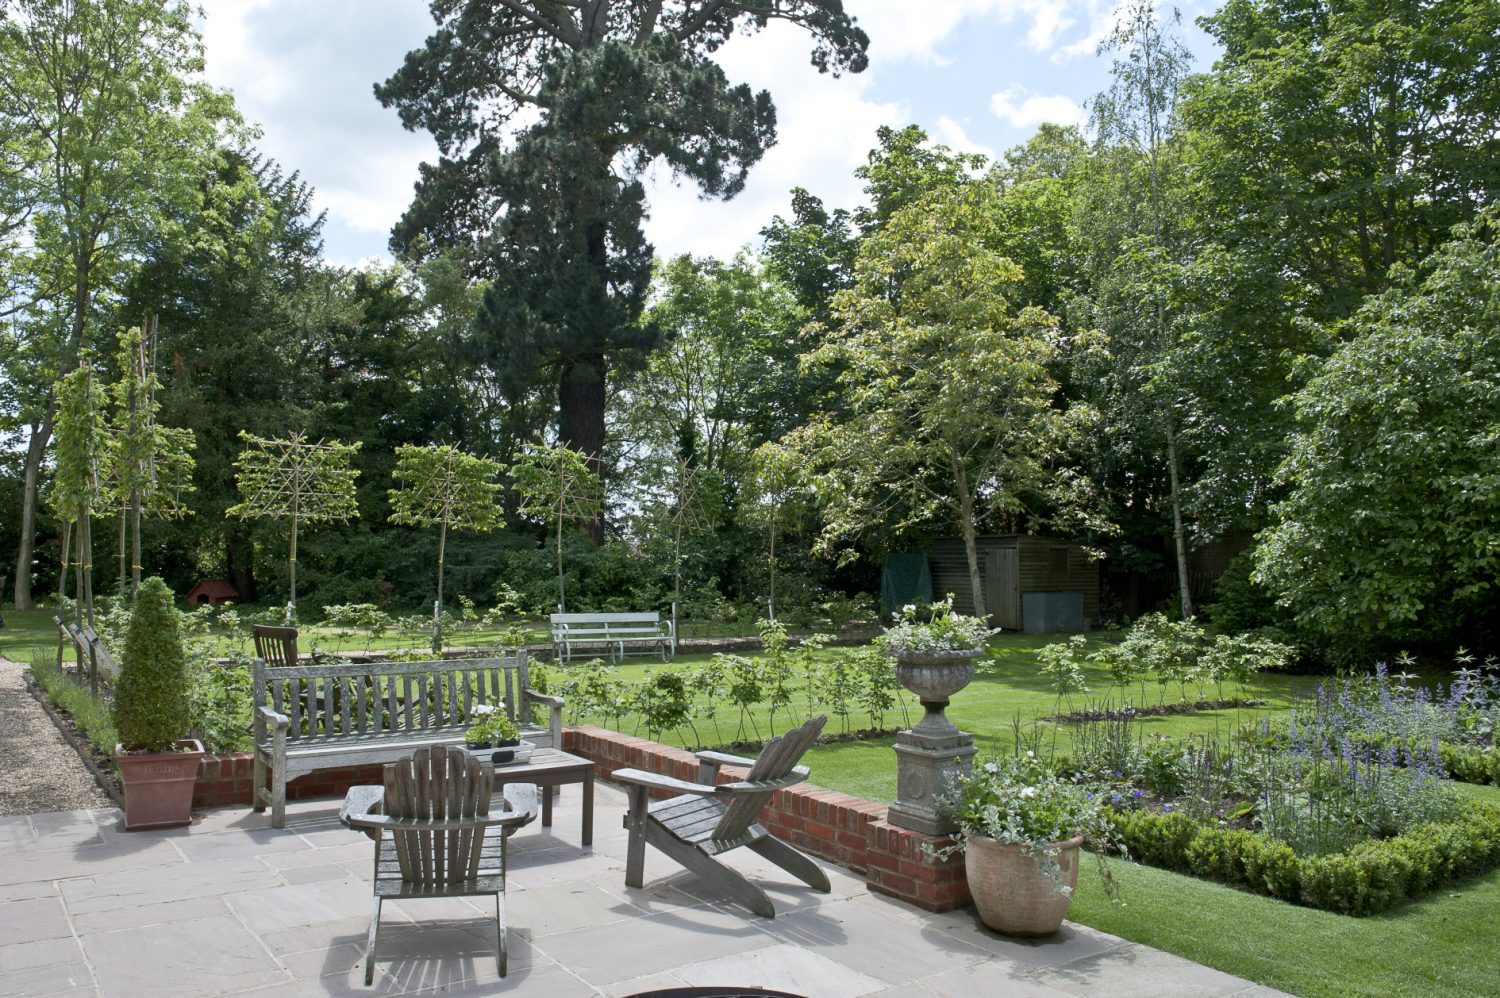 Jo Thompson, a Chelsea gold-medallist, has re-designed the garden for Belinda. Jo’s design includes a parterre leading off the terrace, the original of which has been extended to provide a larger seating area